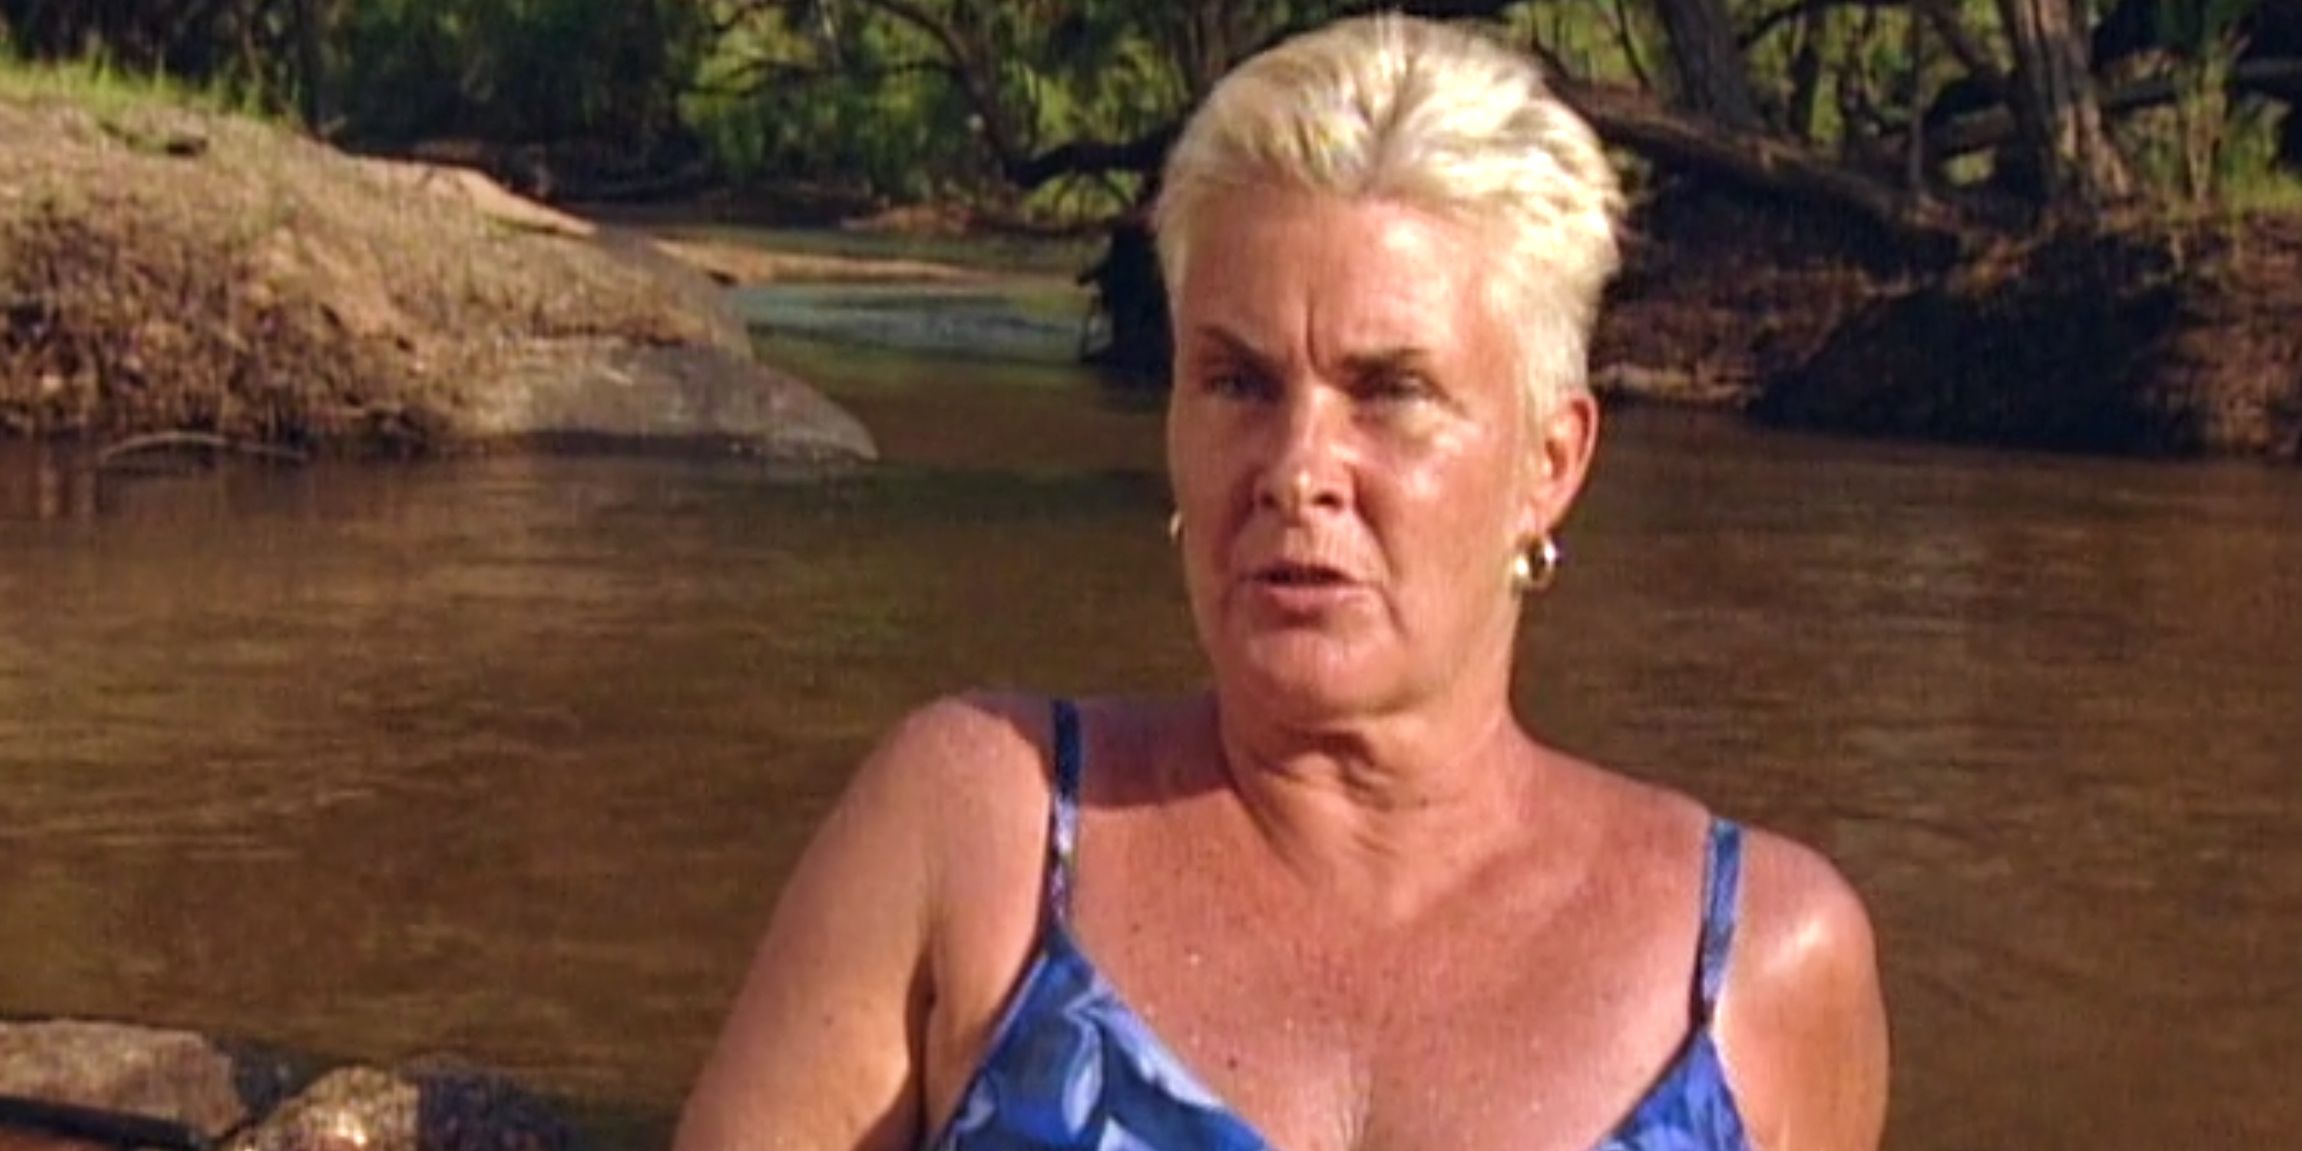 Mad Dog wears a bathing suit and sits in a stream while giving a confessional interview on Survivor